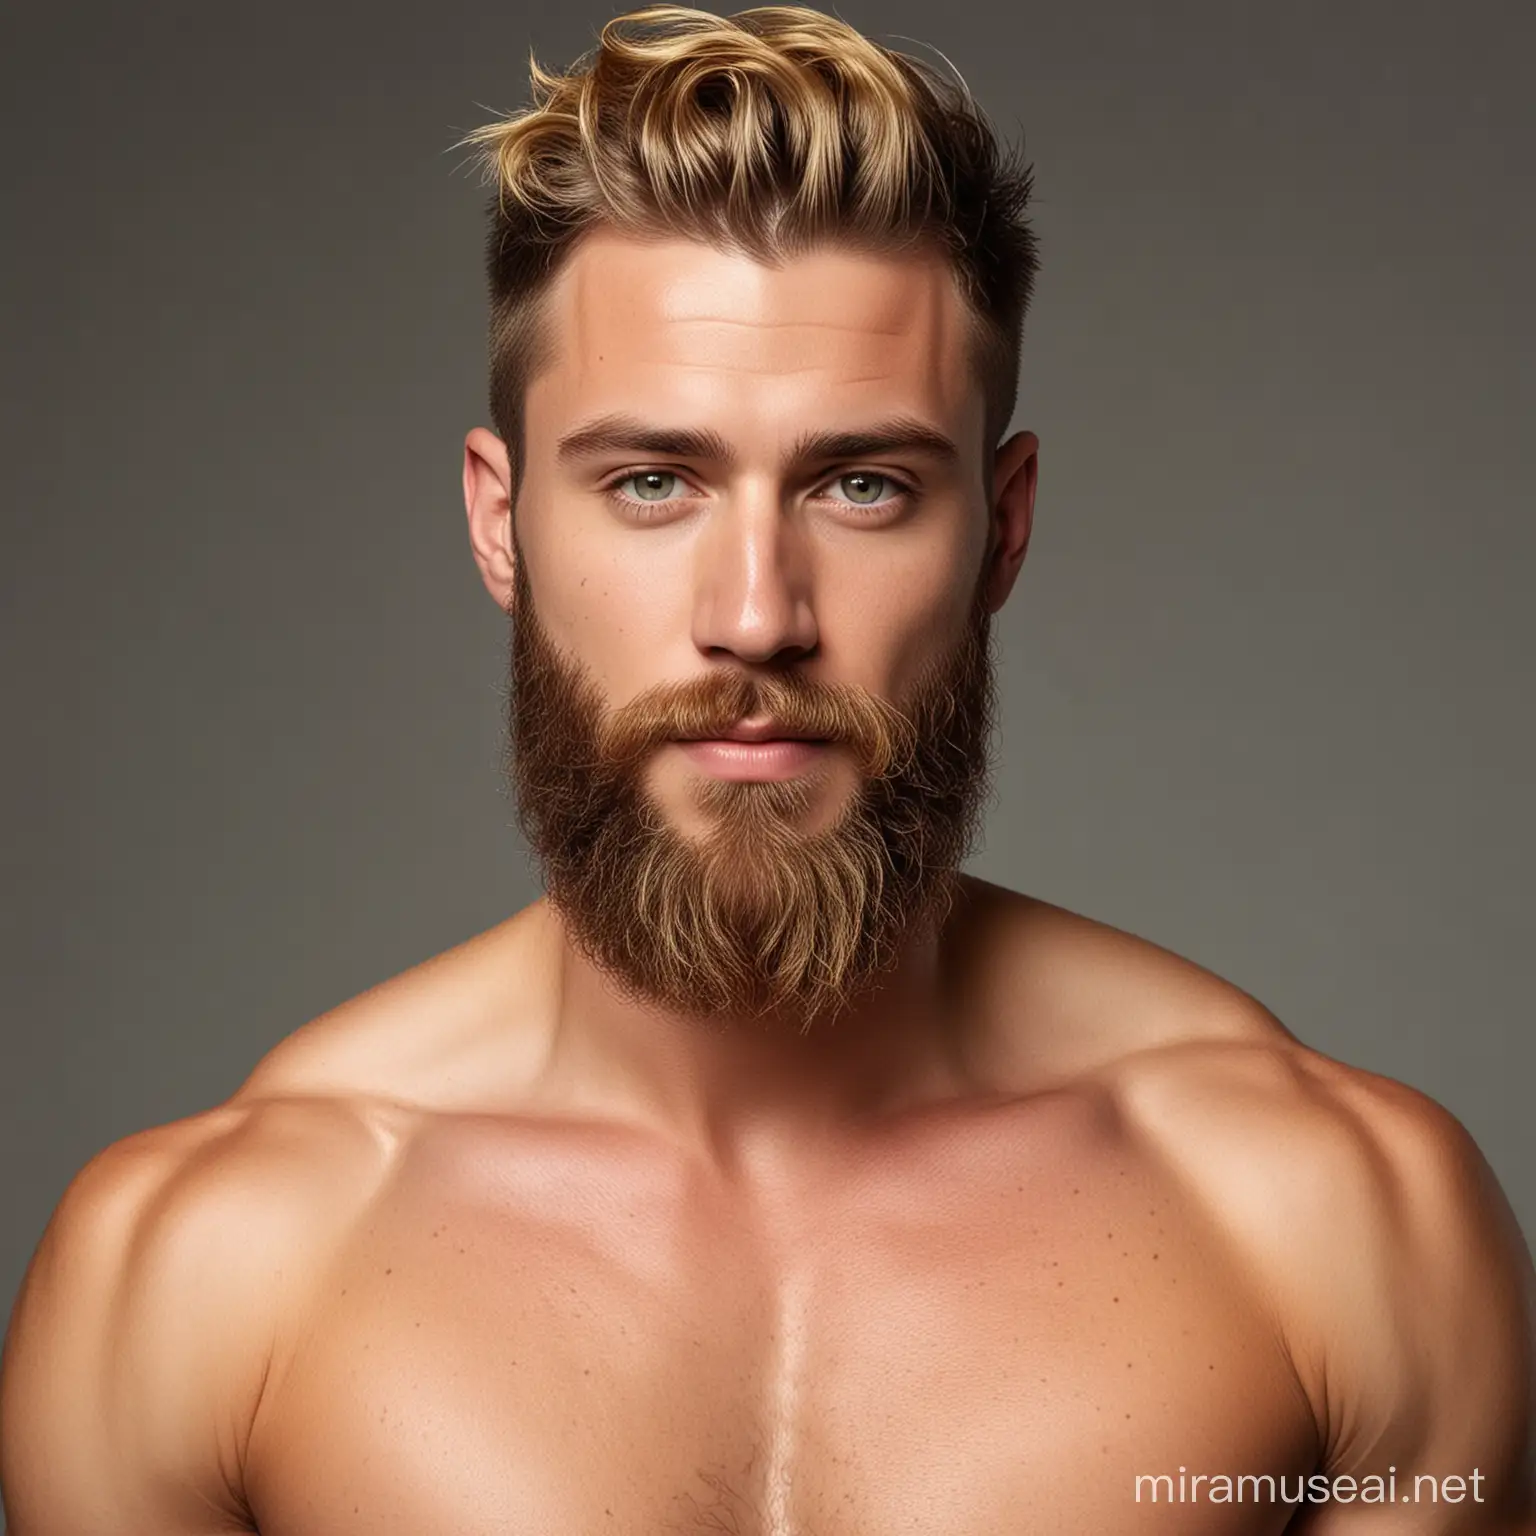 Image of a man in mid twenties and handsome gold hair and beard and muscular 